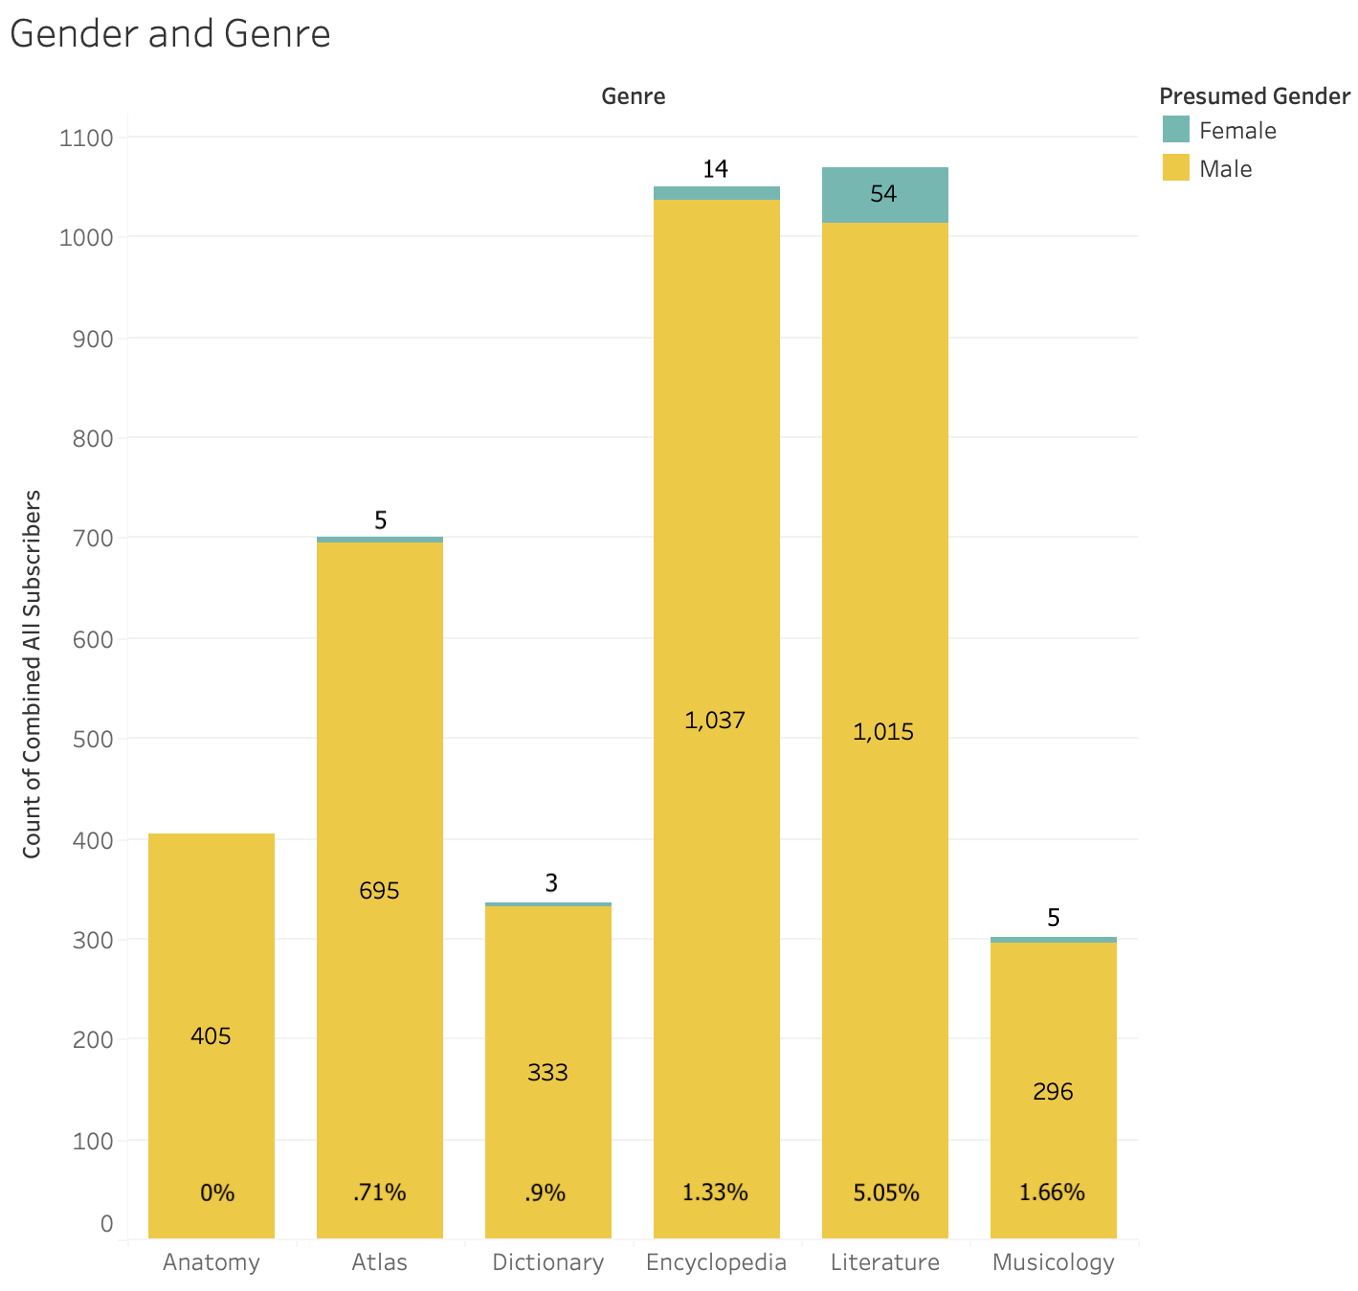 A graph showing the distribution of female subscribers across different genres, with the number of subscribers and percentage presumed female listed. Anatomy has 0% female subscribers, Atlases have .71%, Dictionaries have .9%, Encyclopedias have 1.33%, literature has 5%, and musicology has 1.66%.